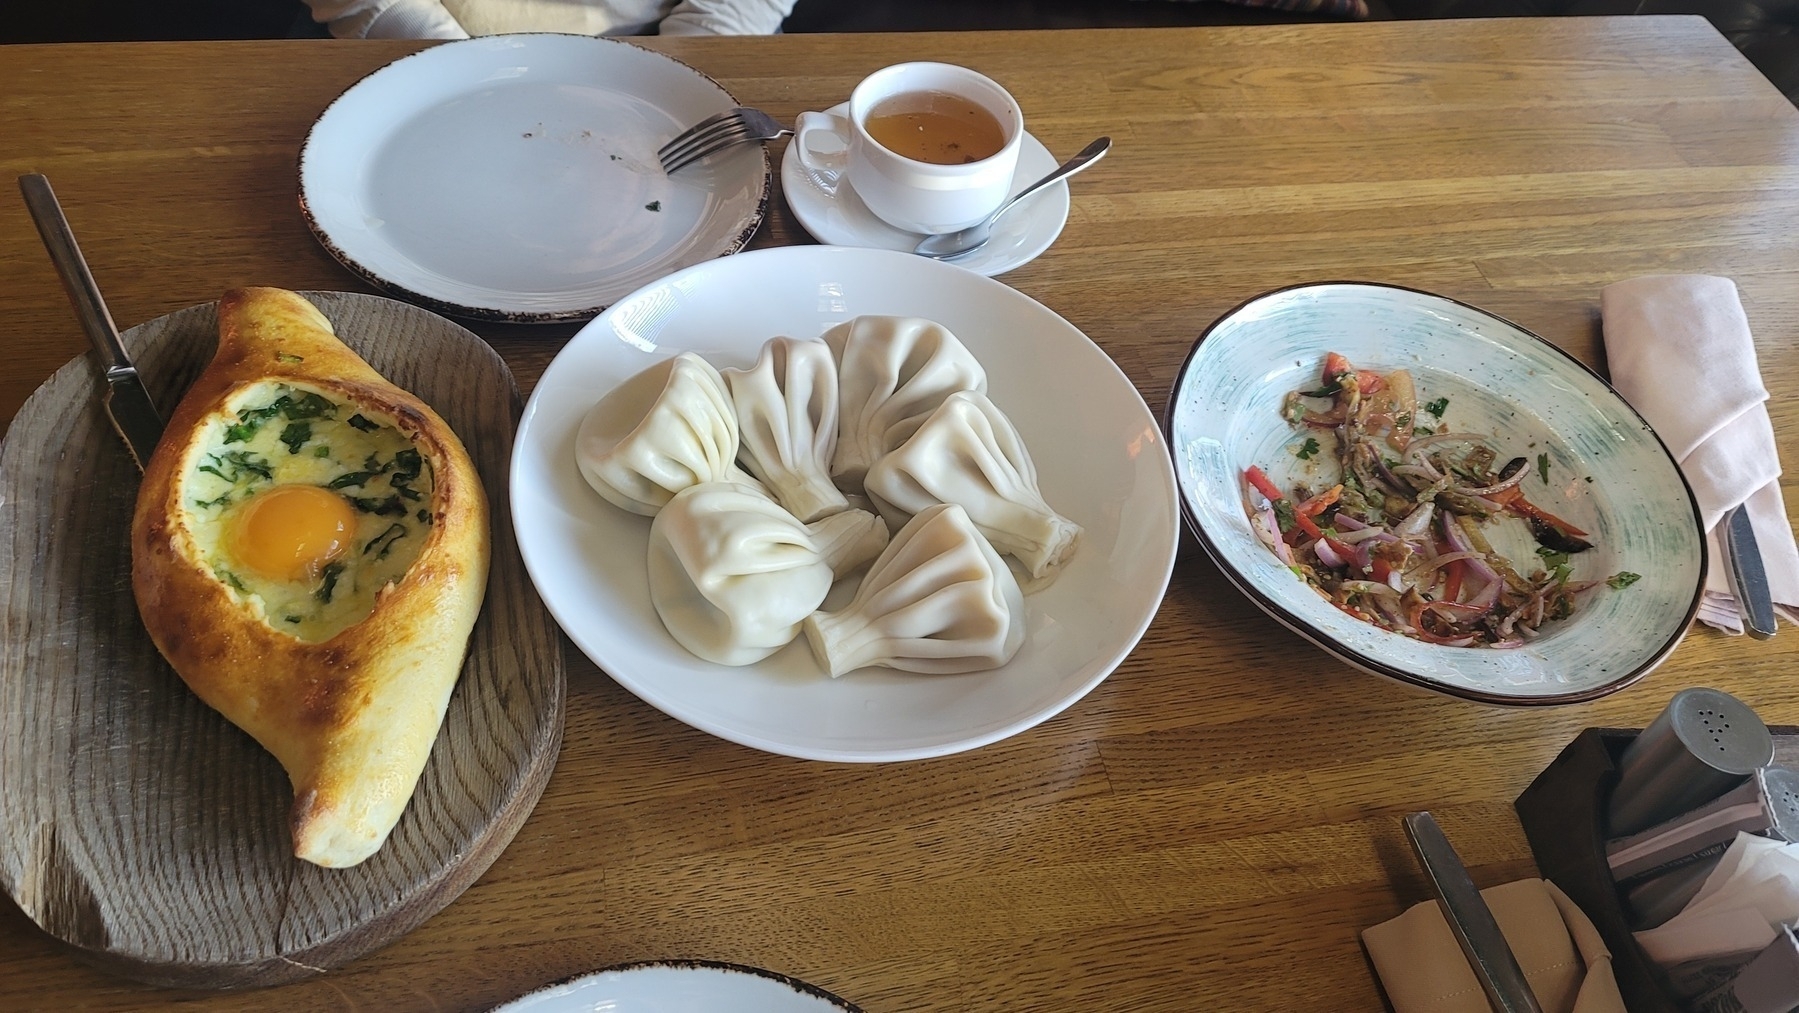 khachapuri (bread with a lowered part in the middle filled with an egg, cheese and spinach ), plate of 6 khinkali, tea and half of a salad on a table 